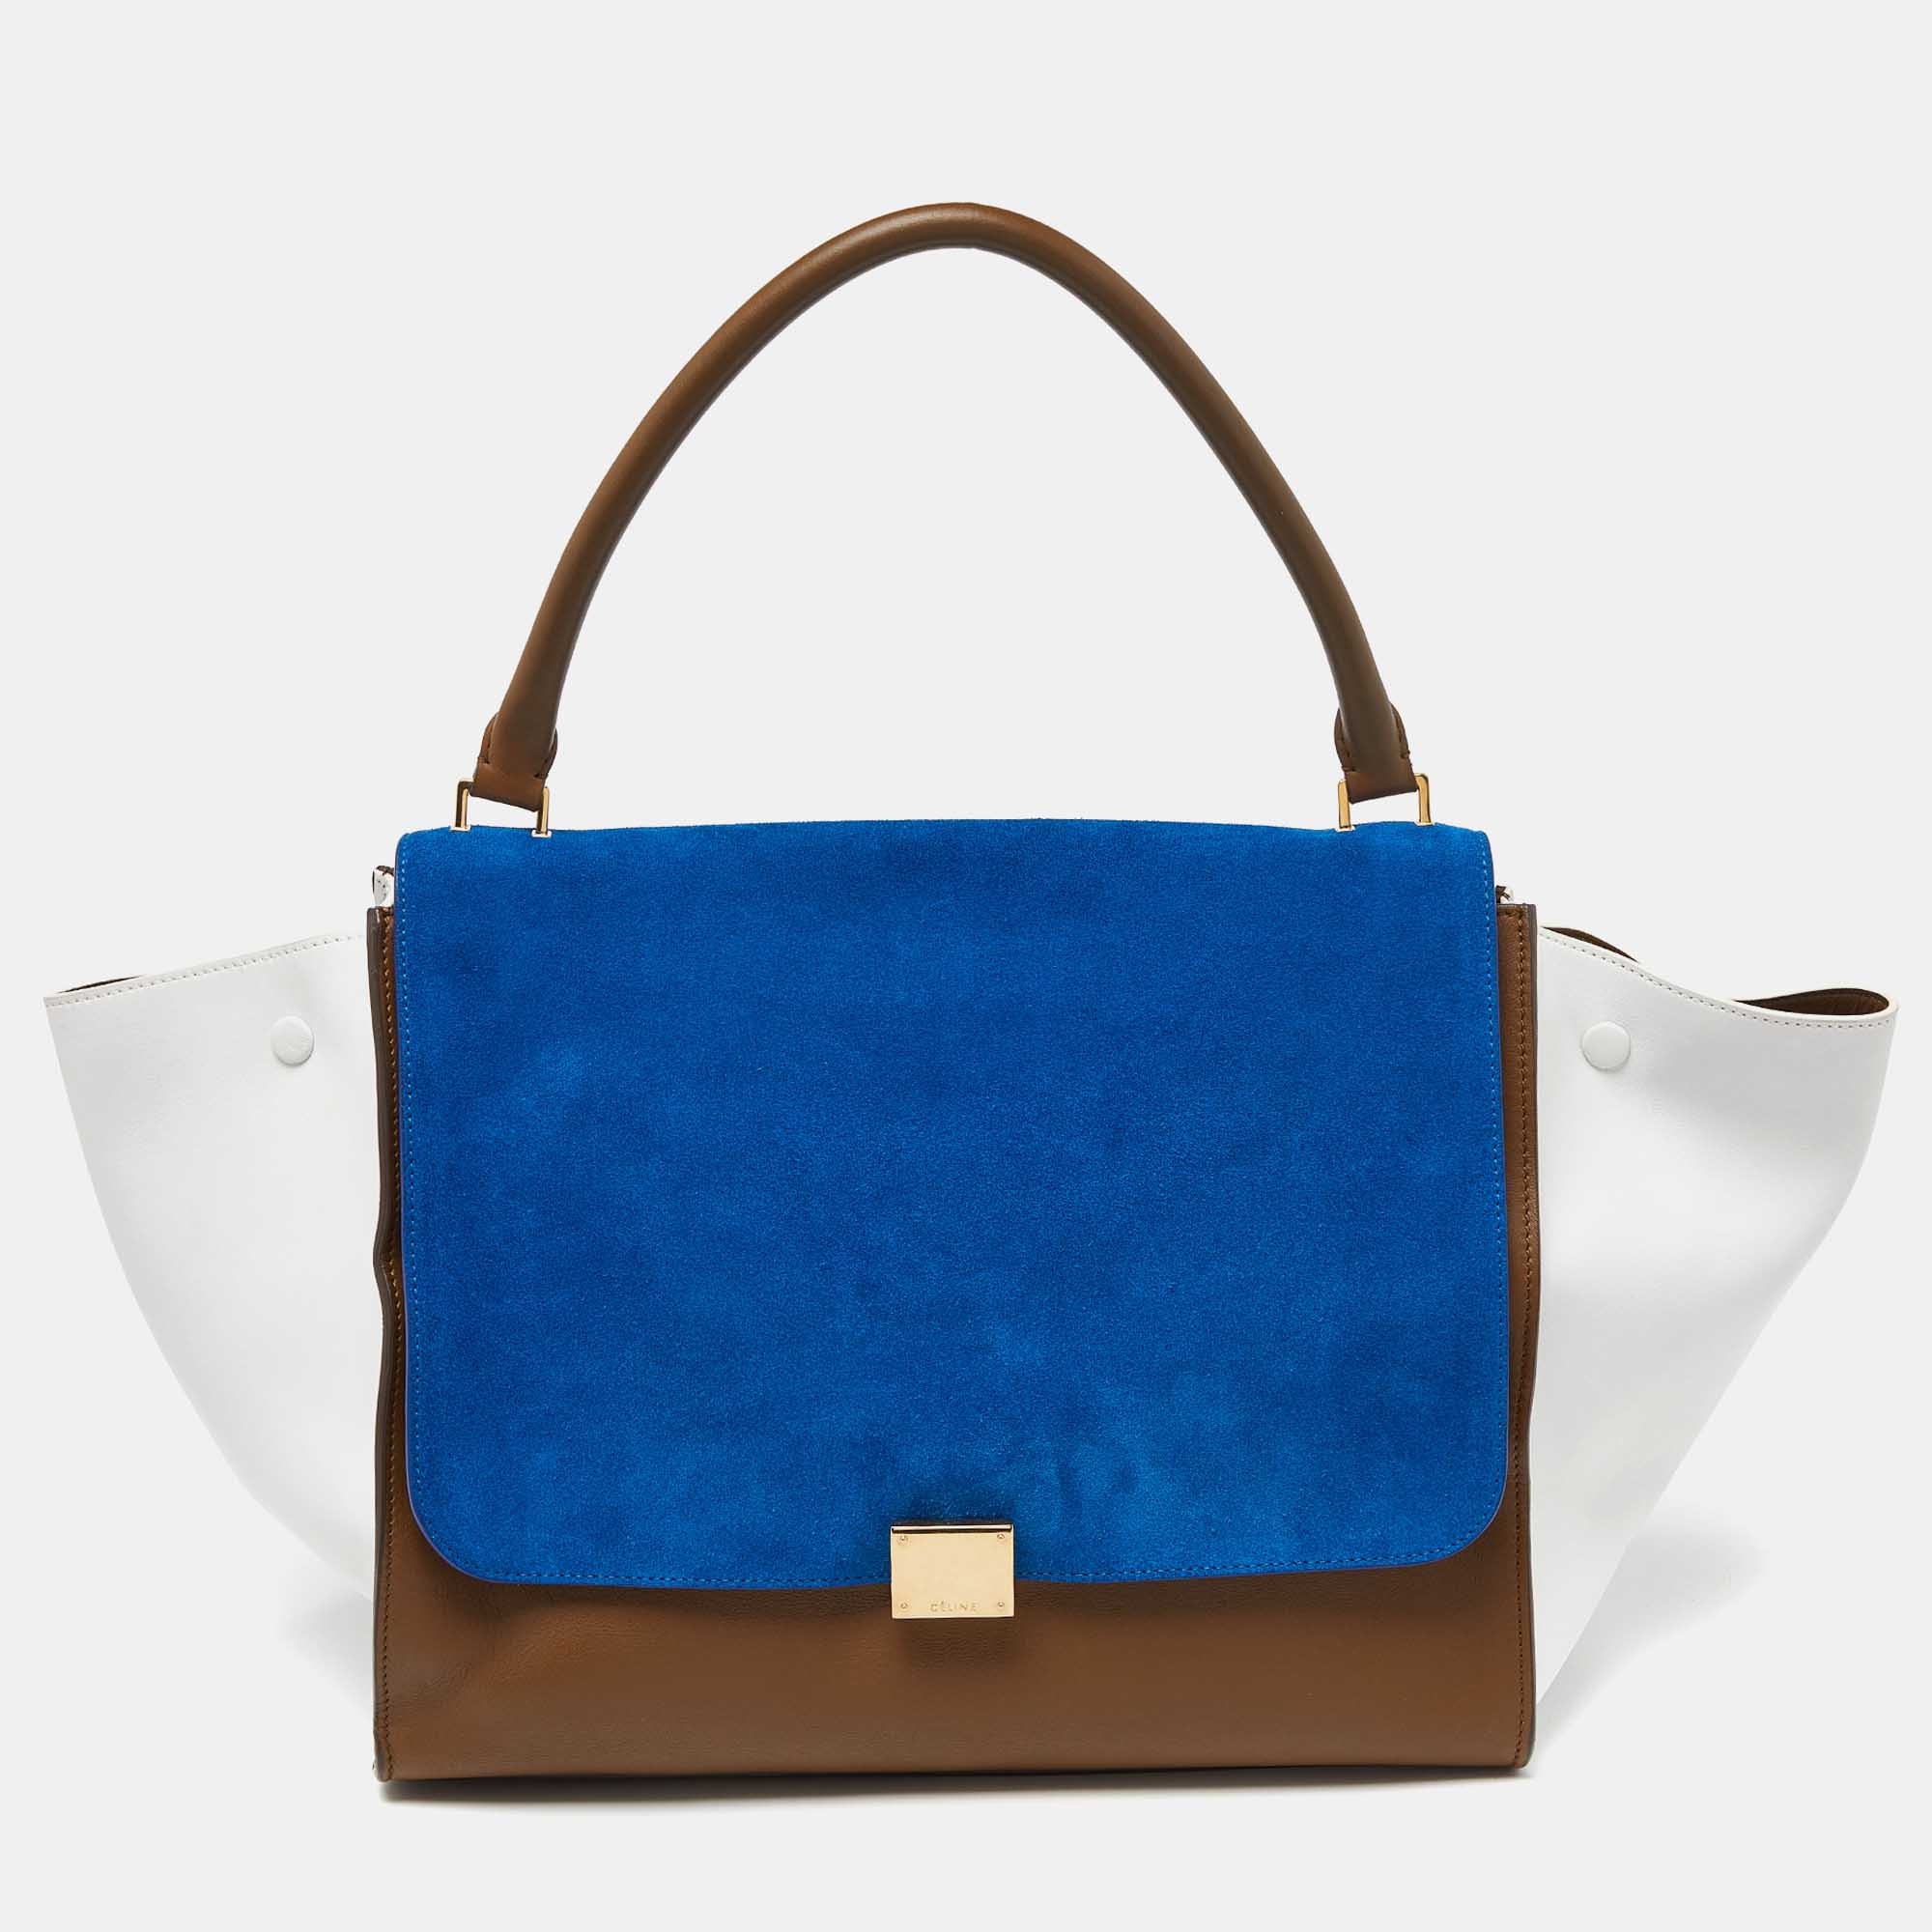 Celine tricolor leather and suede large trapeze bag